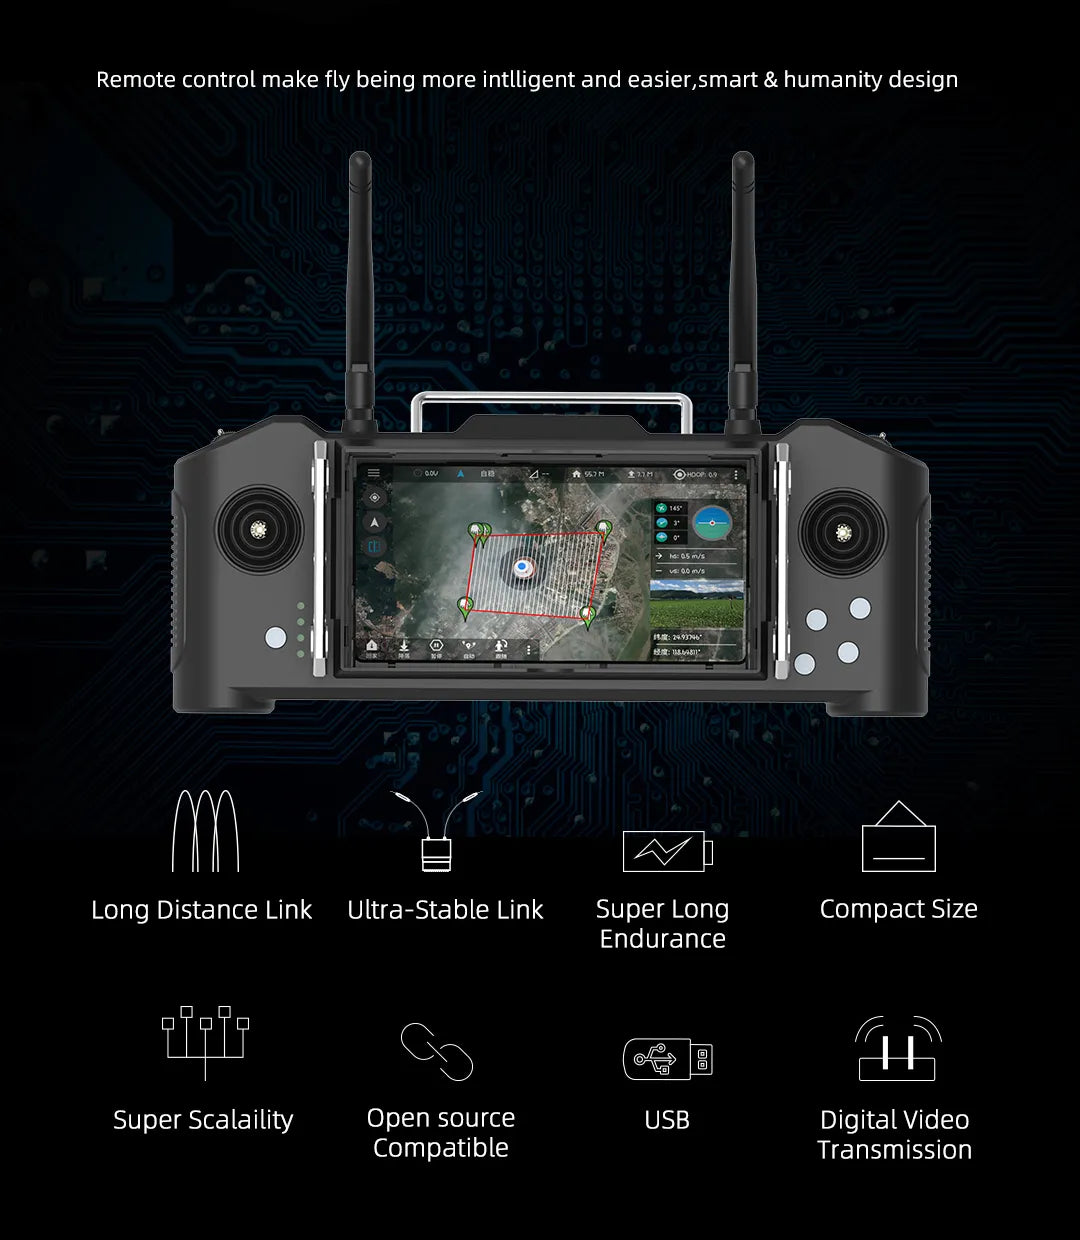 Skydroid SG12 Remote Controller, Smart remote controller with long-distance link, stability, compact design, and endurance for easy flight control.